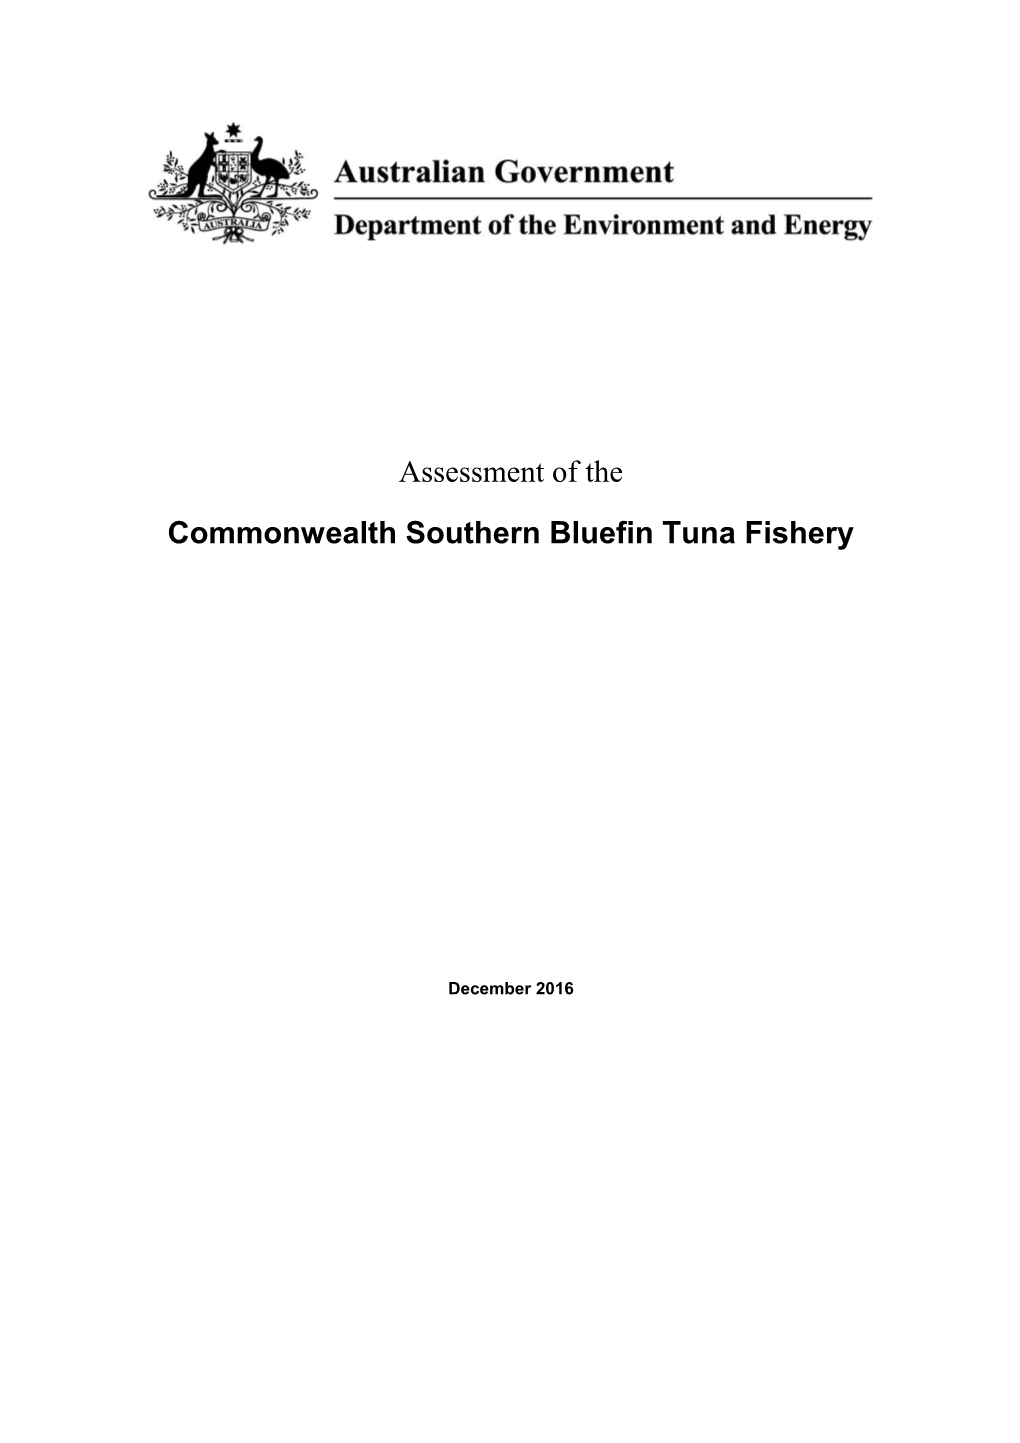 Assessment of the Commonwealth Southern Bluefin Tuna Fishery s1